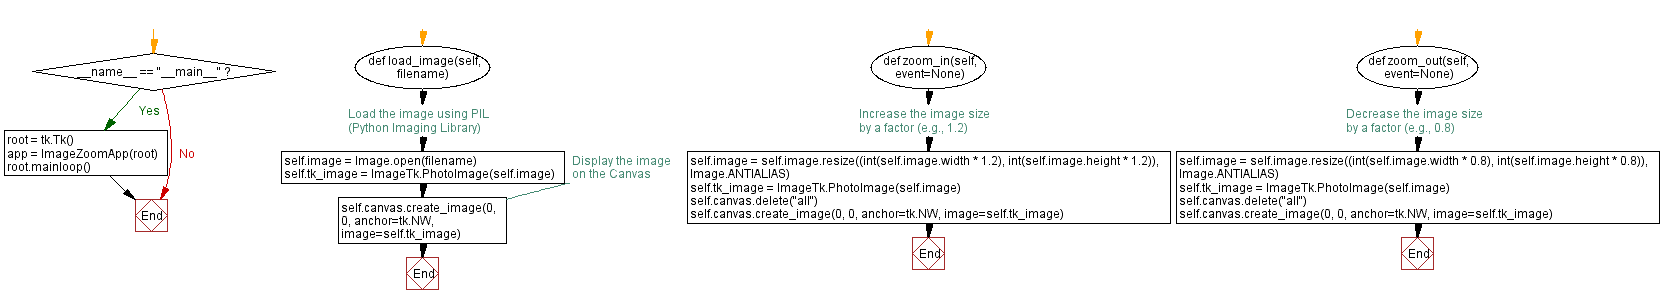 Flowchart: Creating an image zooming application in Python with Tkinter.